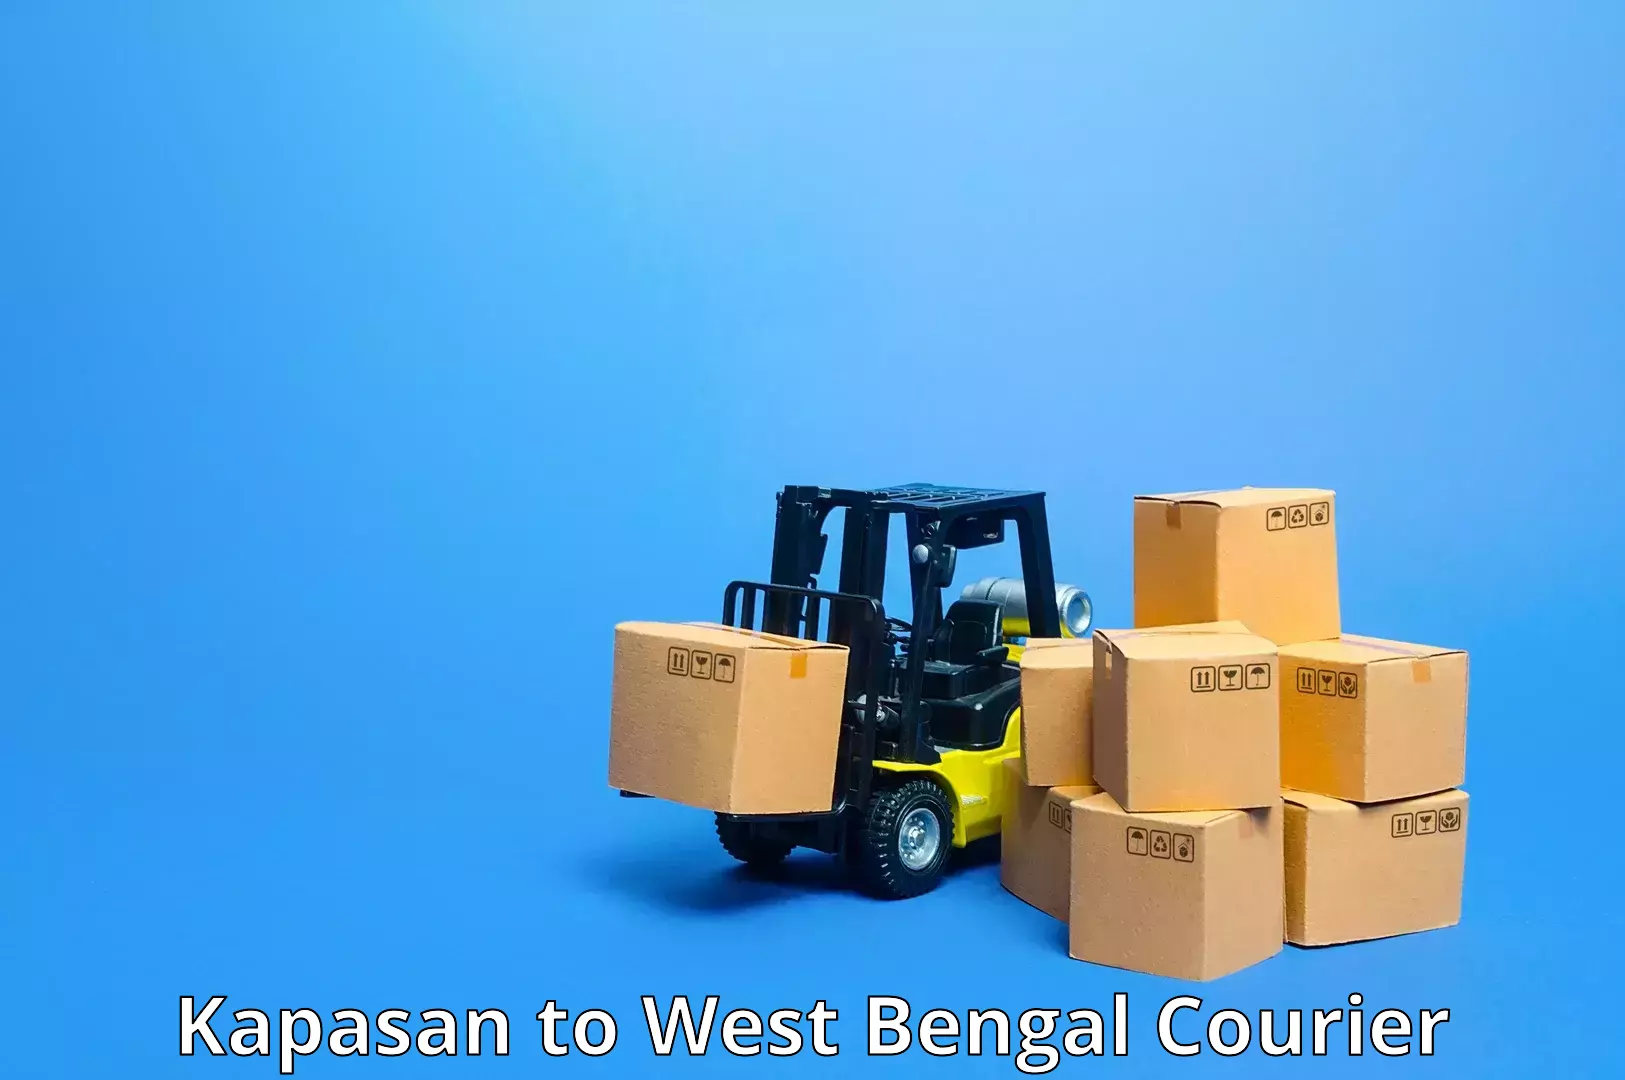 Global shipping networks in Kapasan to West Bengal